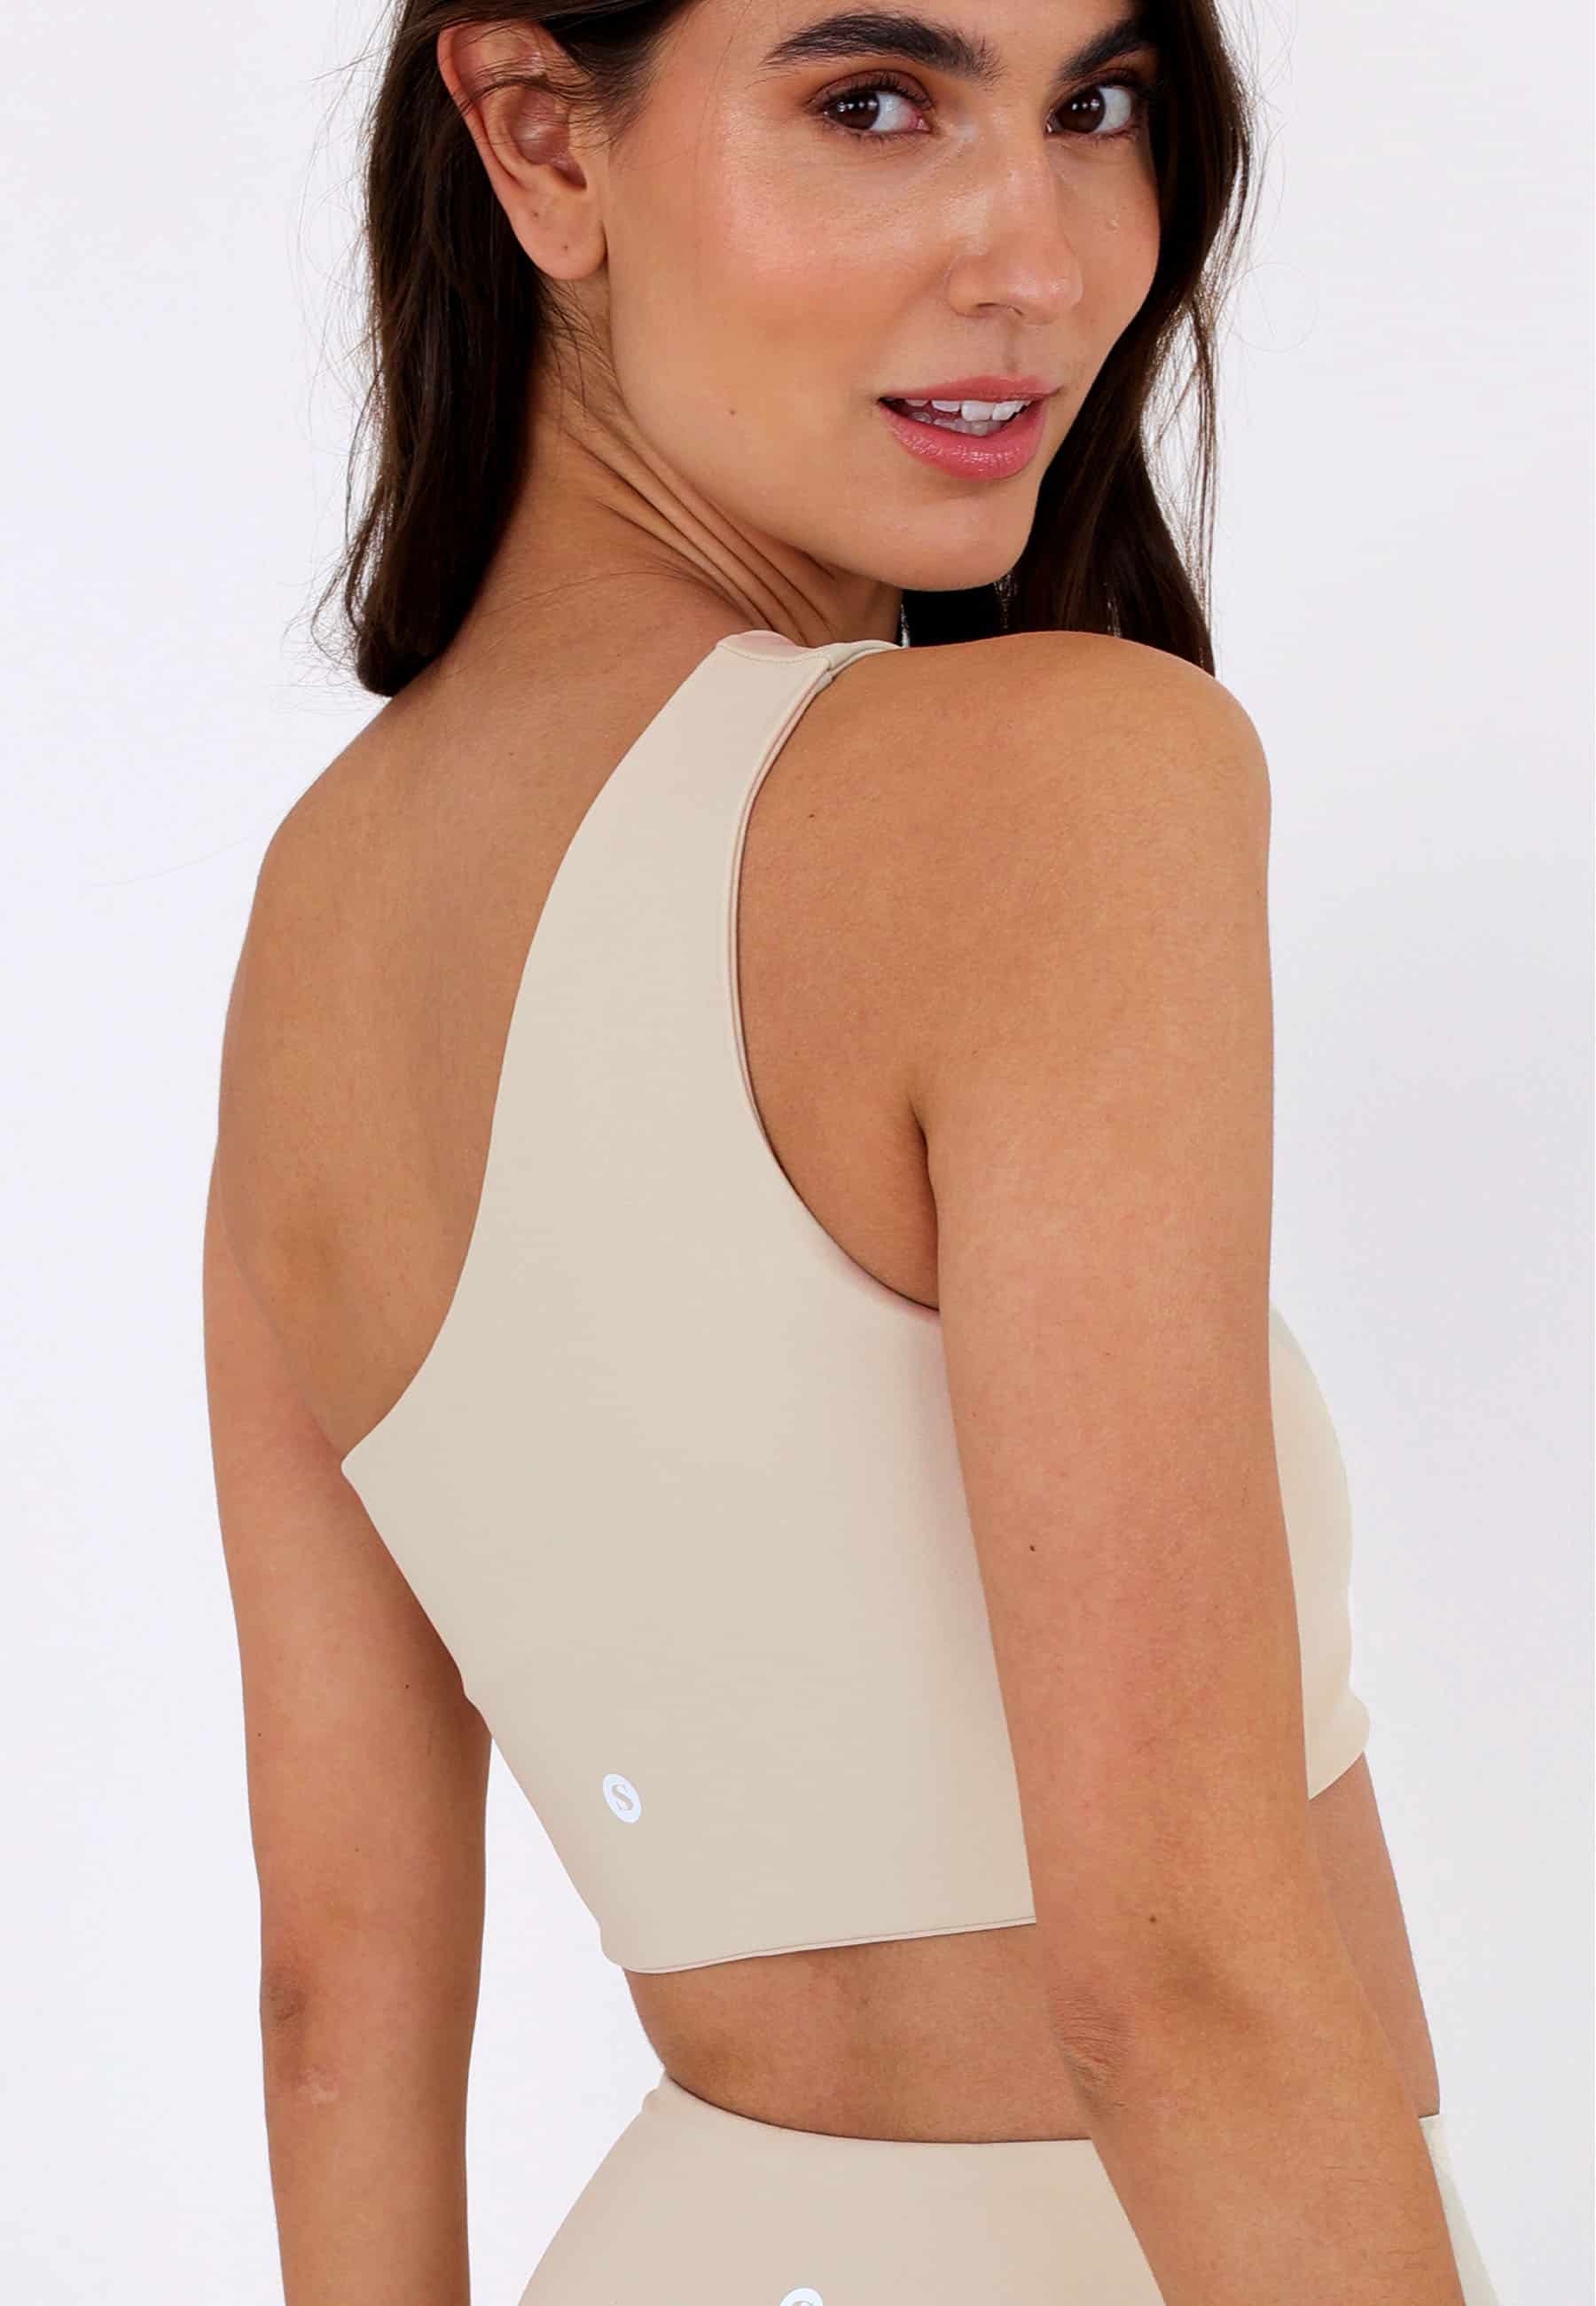 Sisterly Tribe - One Shoulder Top Cream. One Shoulder design, Light to medium support, Buttery Soft & light, matte fabric.